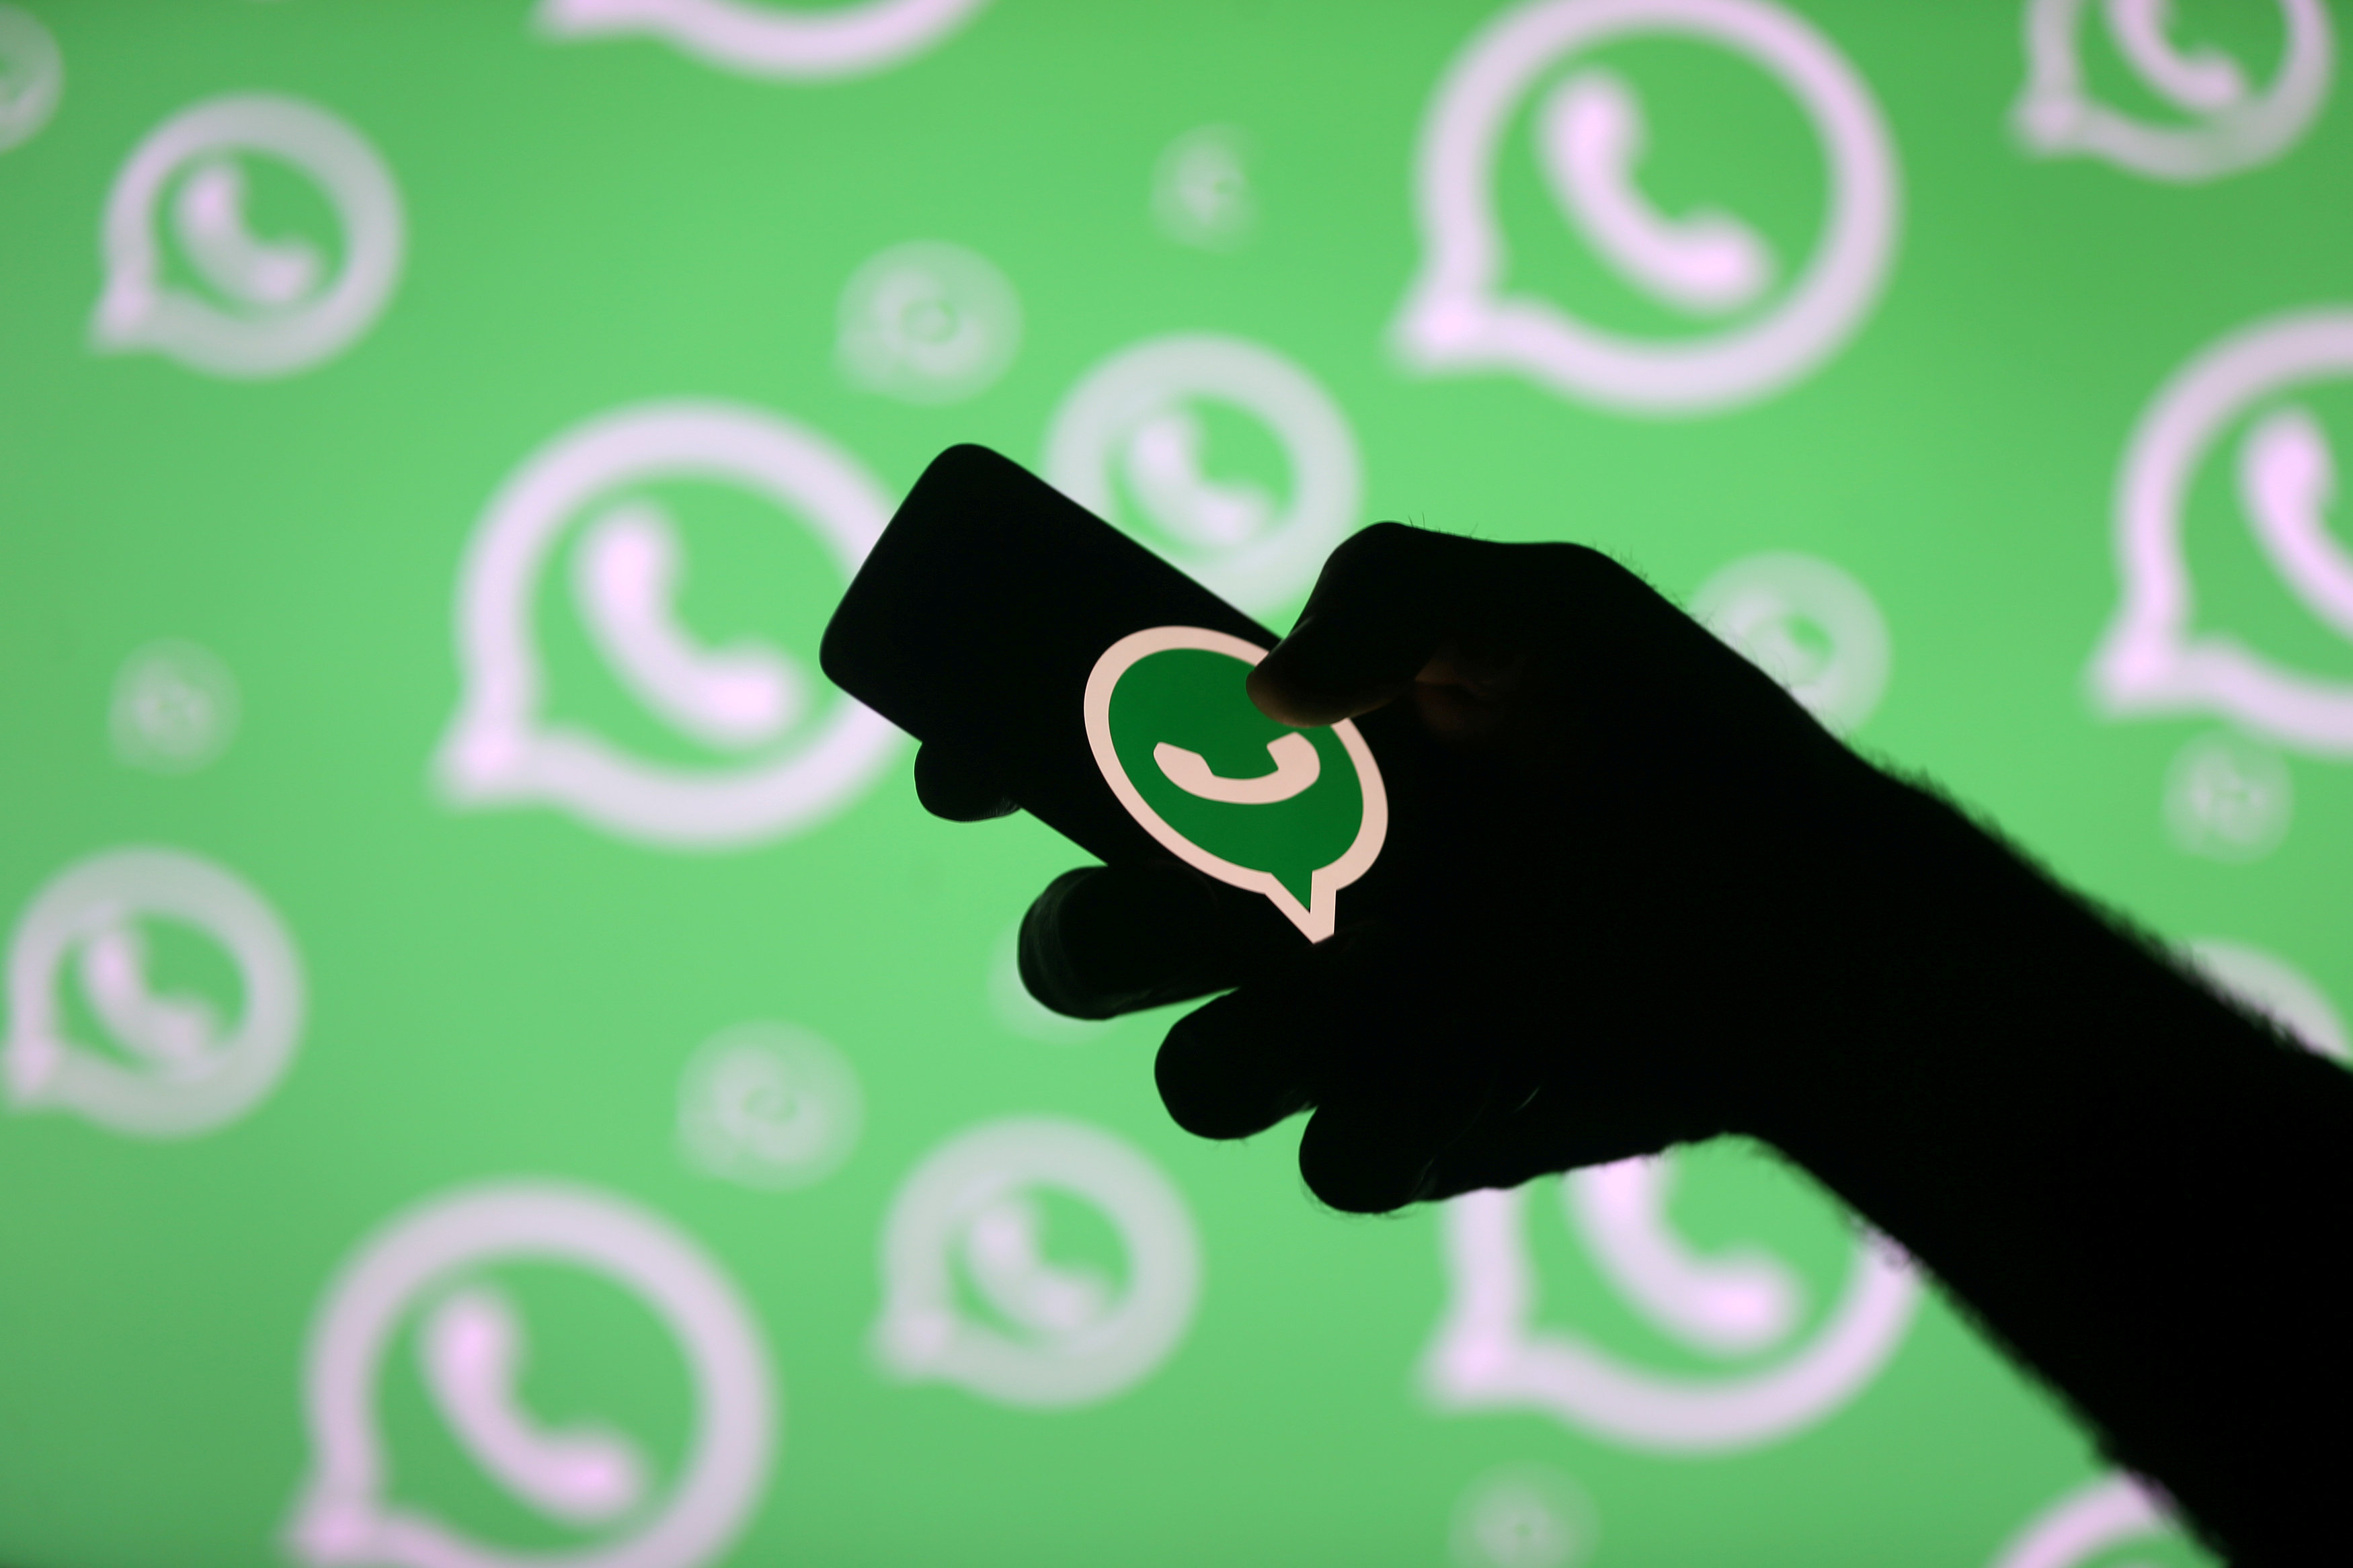 Indonesia drops threat to block WhatsApp over 'GIF' images, steps up Internet obscenity purge